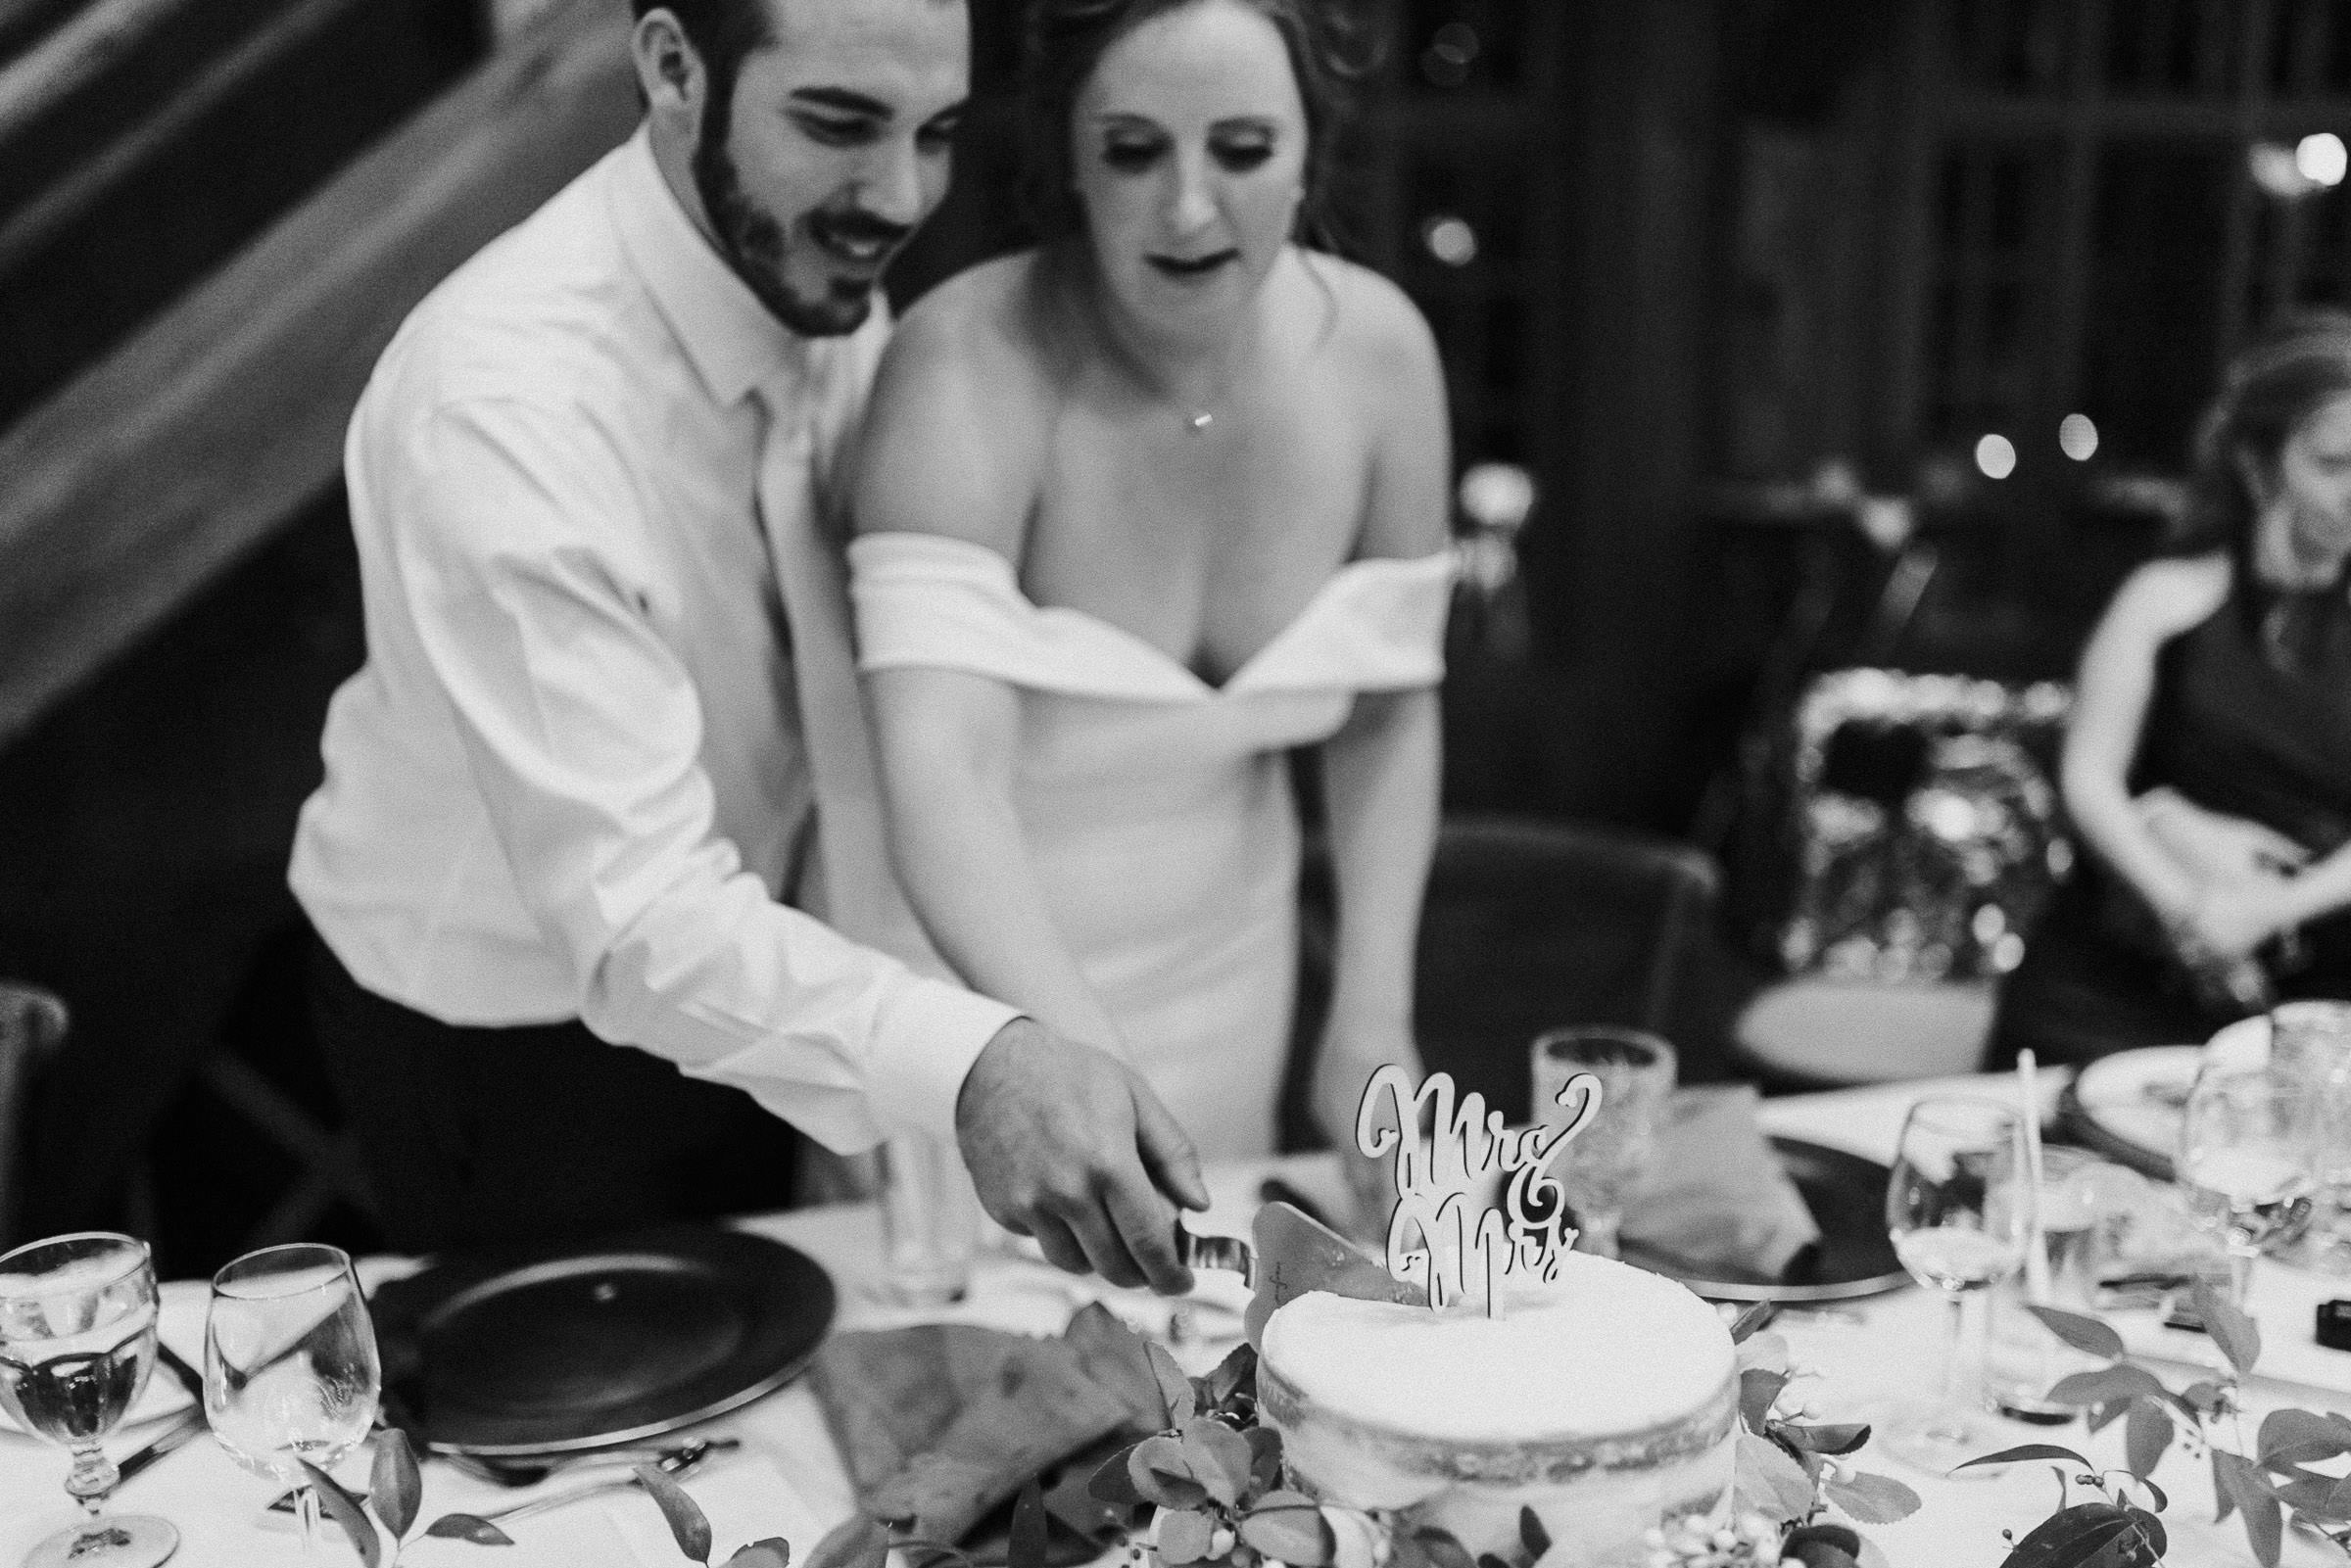 Bride and groom cut their cake together